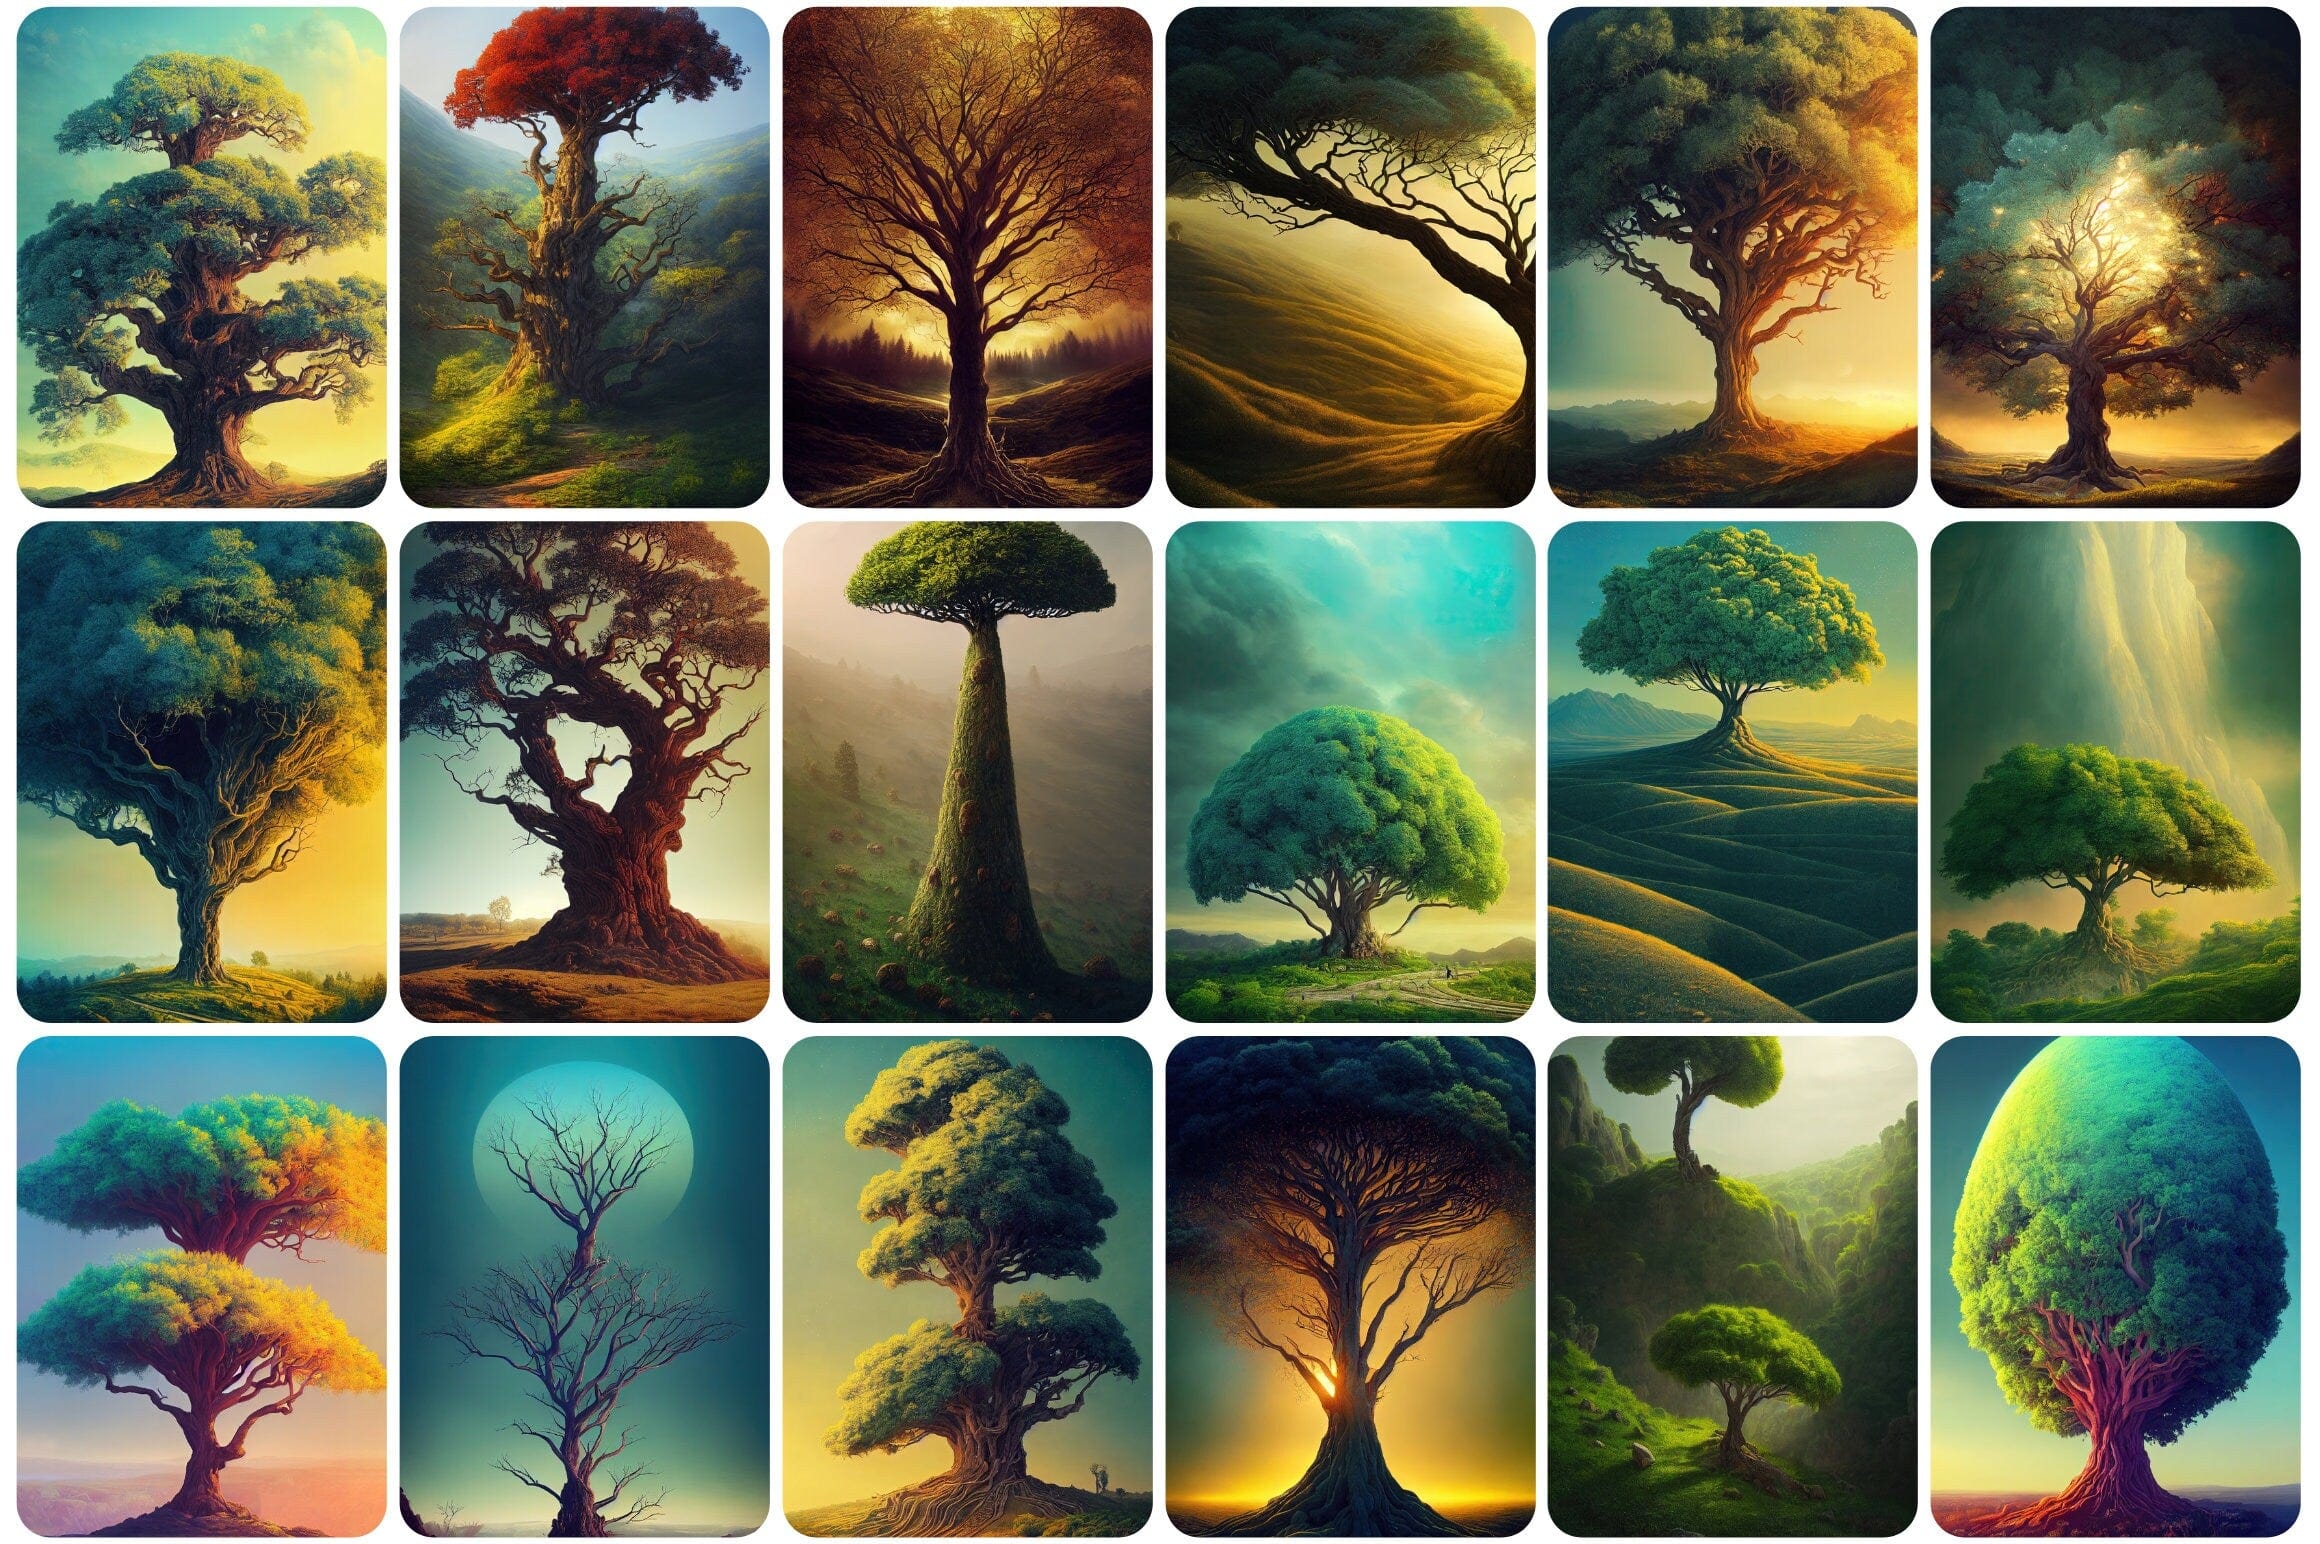 190 Surreal Tree Printable Wall Art Images - Brighten up any Room with Vibrant Animal Wall Art - New York and Paris Prints, Digital Download Digital Download Sumobundle